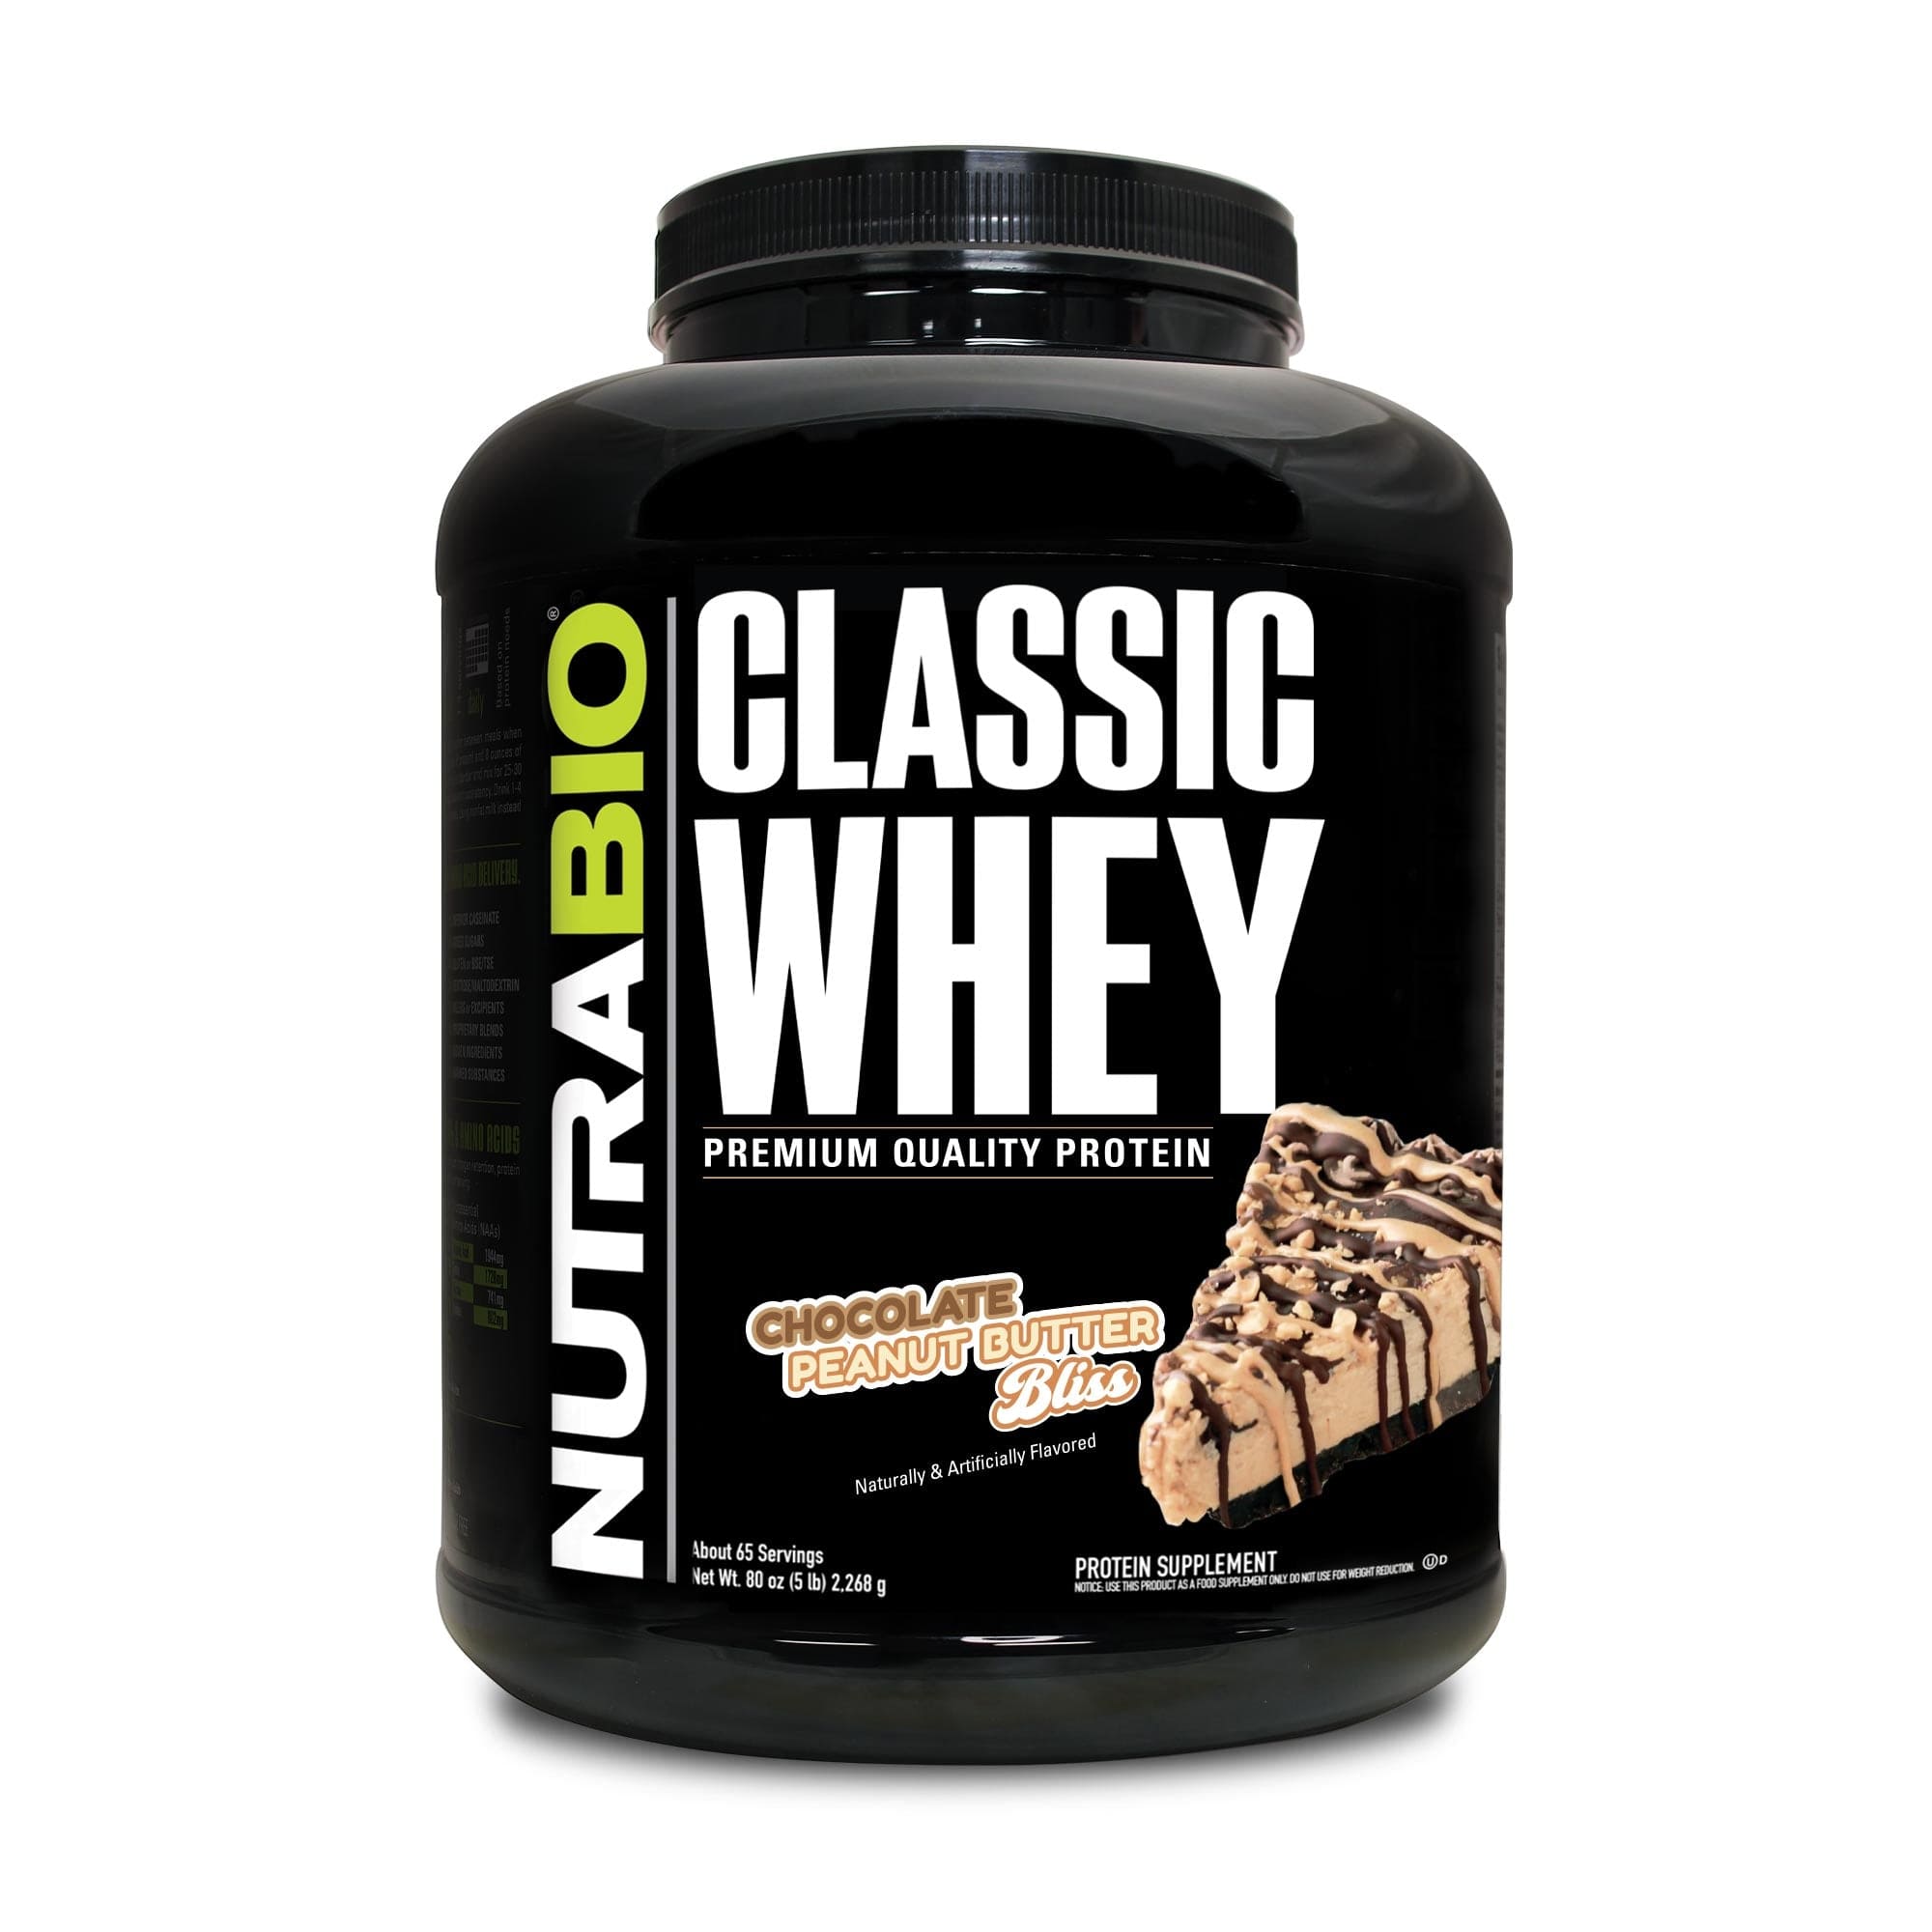 Classic-Whey-Protein-Chocolate-Peanut-Butter-Bliss.jpg